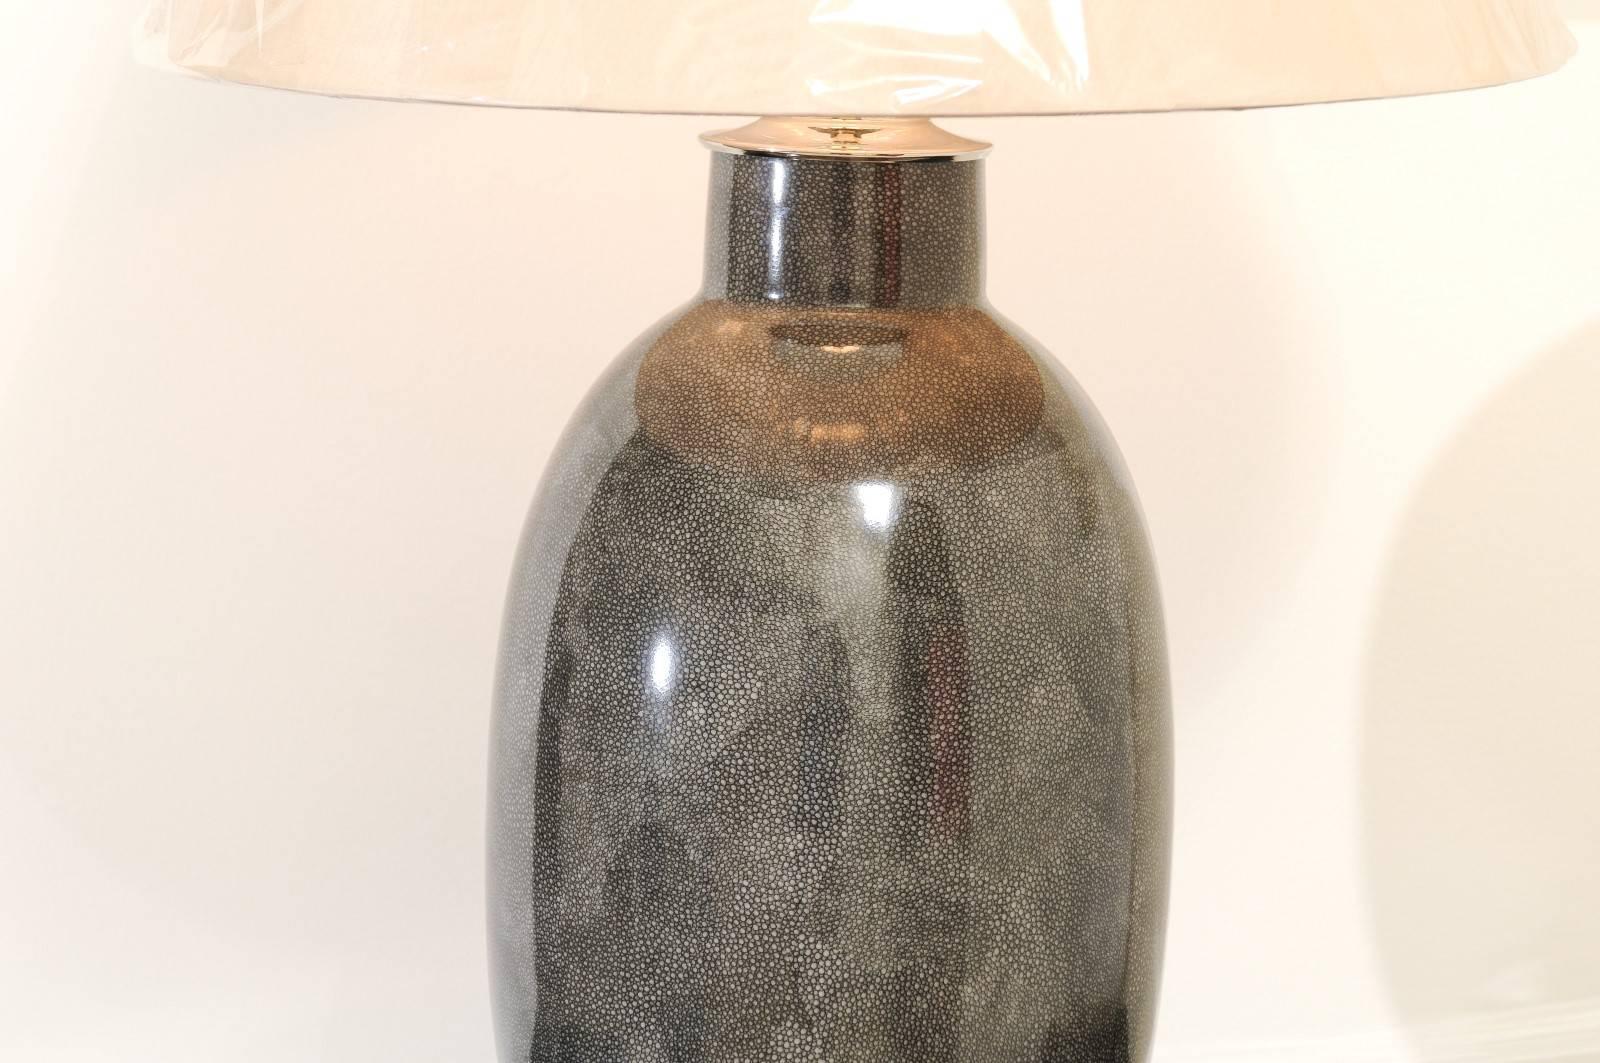 Killer Pair of Faux-Shagreen Ceramic Lamps in Charcoal In Excellent Condition For Sale In Atlanta, GA